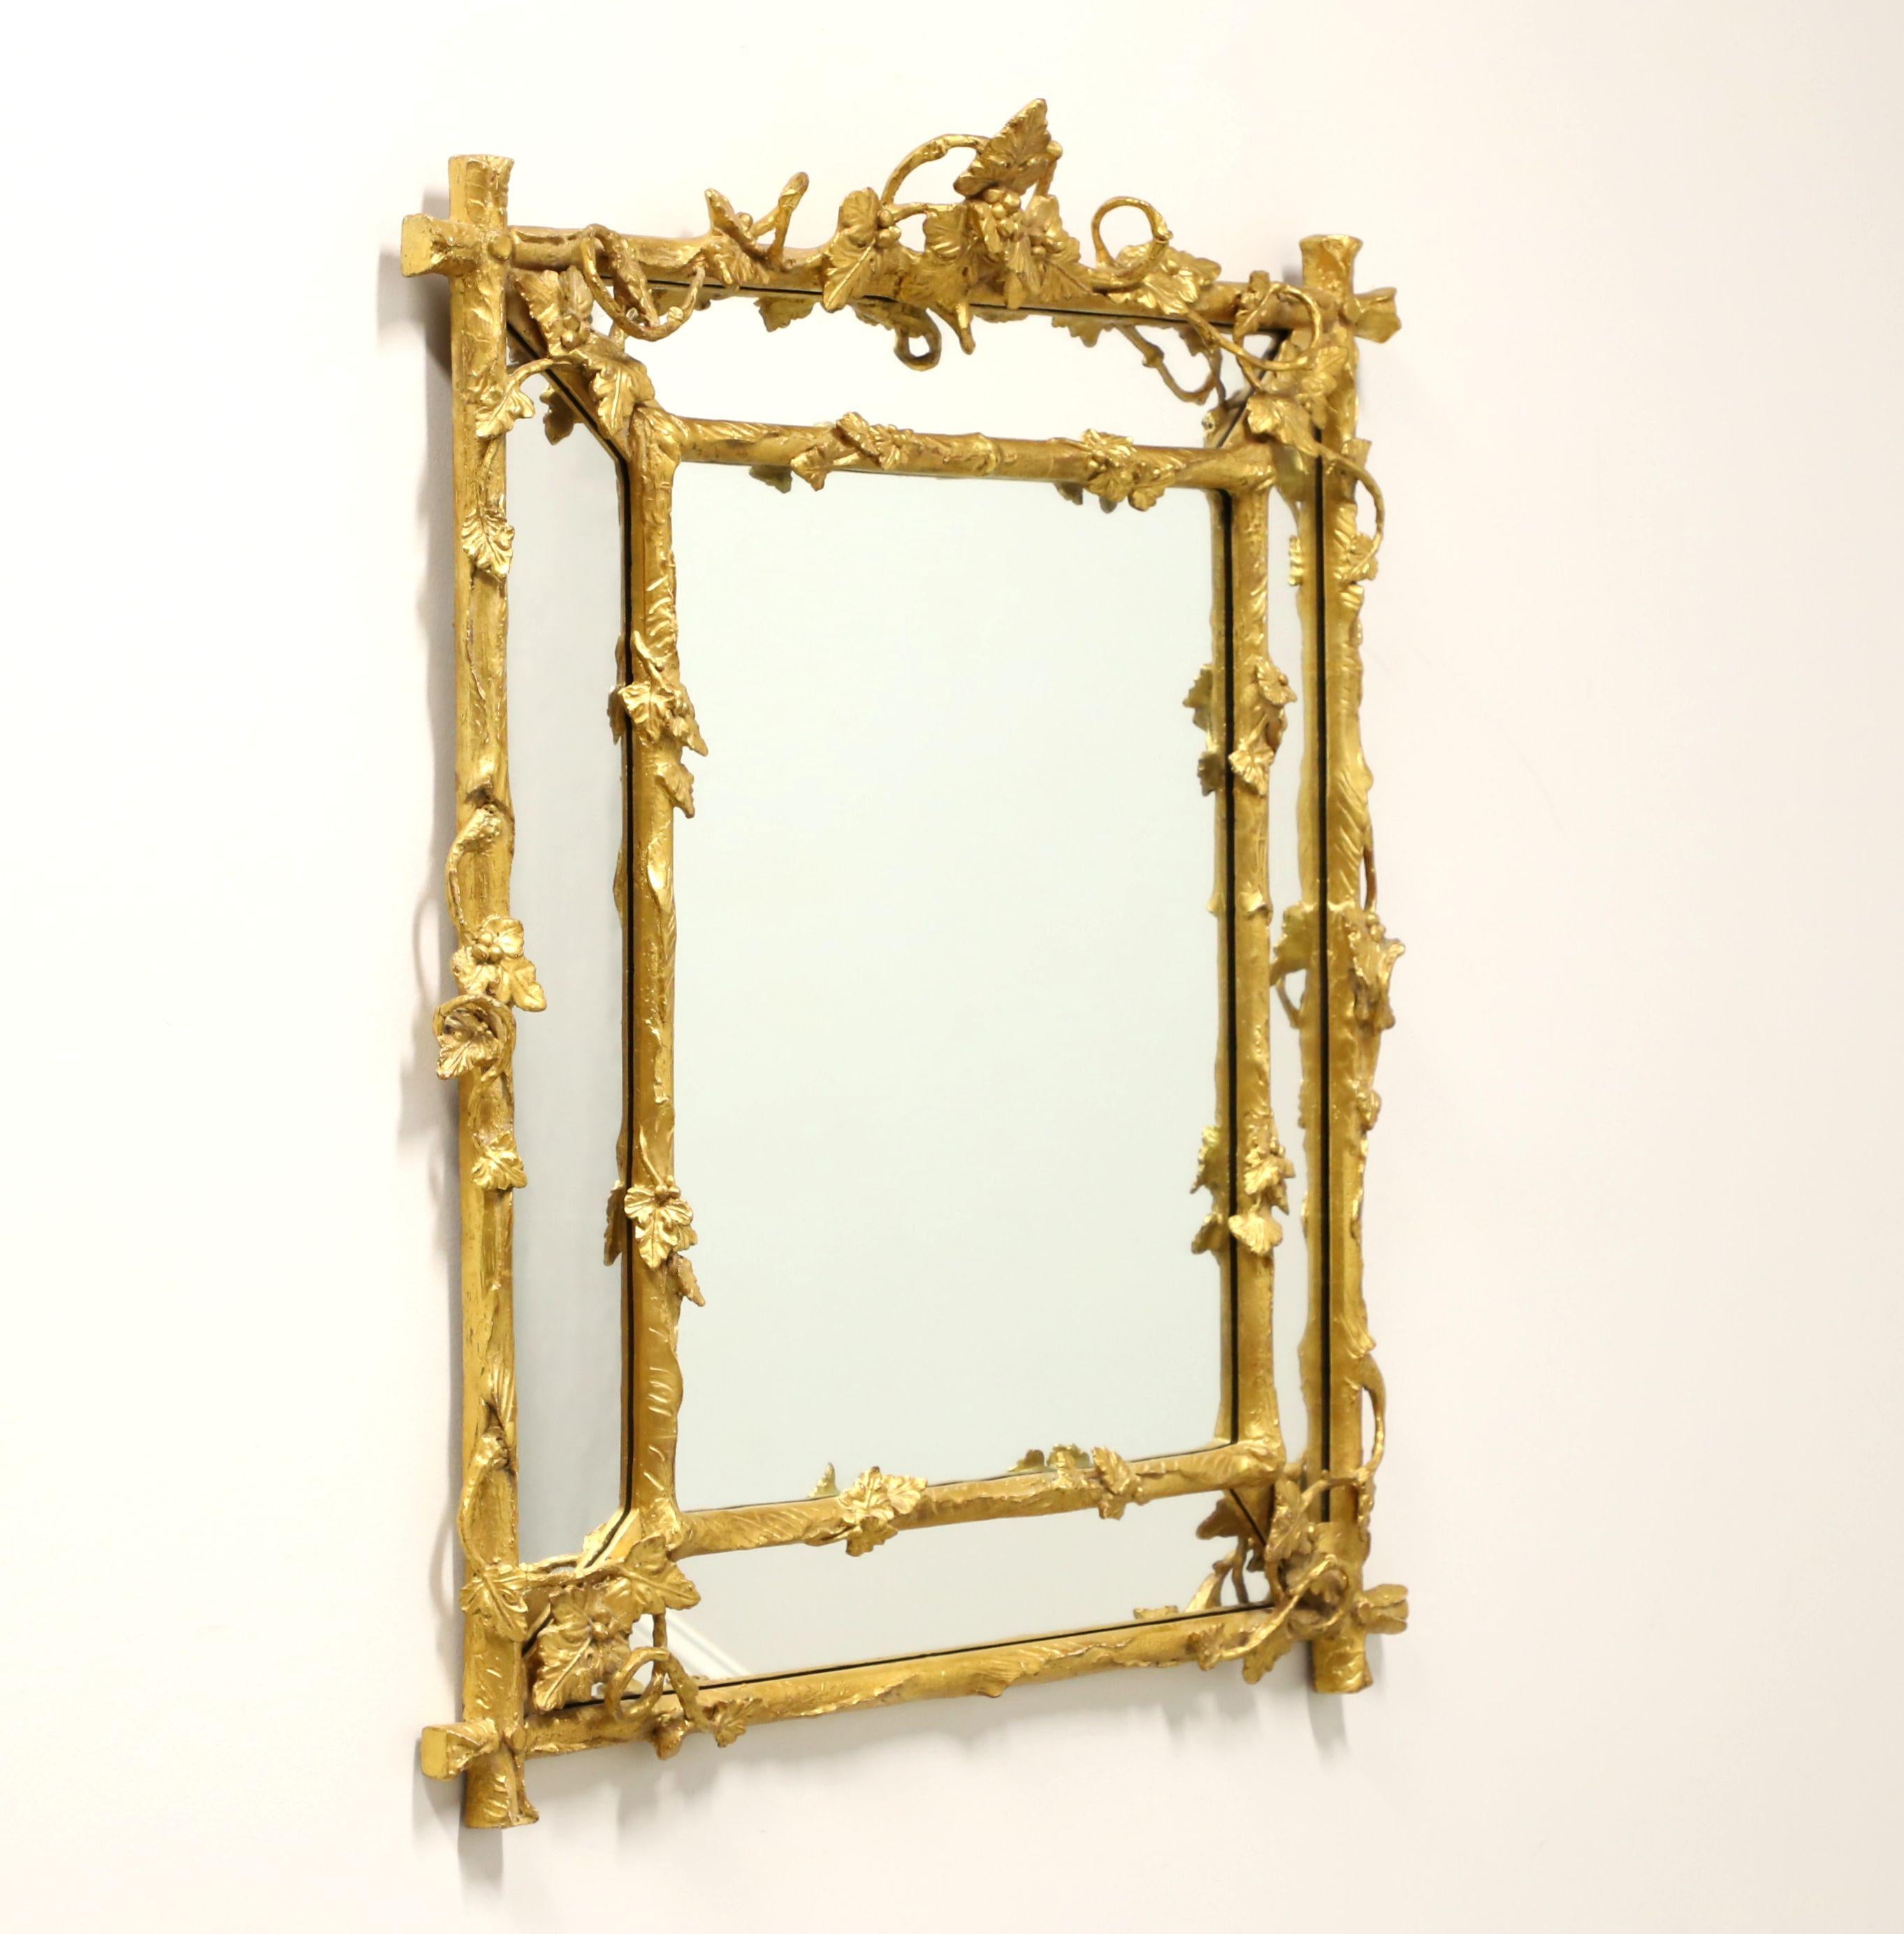 1980's Gold Giltwood Foliate with Grapevine Parclose Wall Mirror For Sale 2